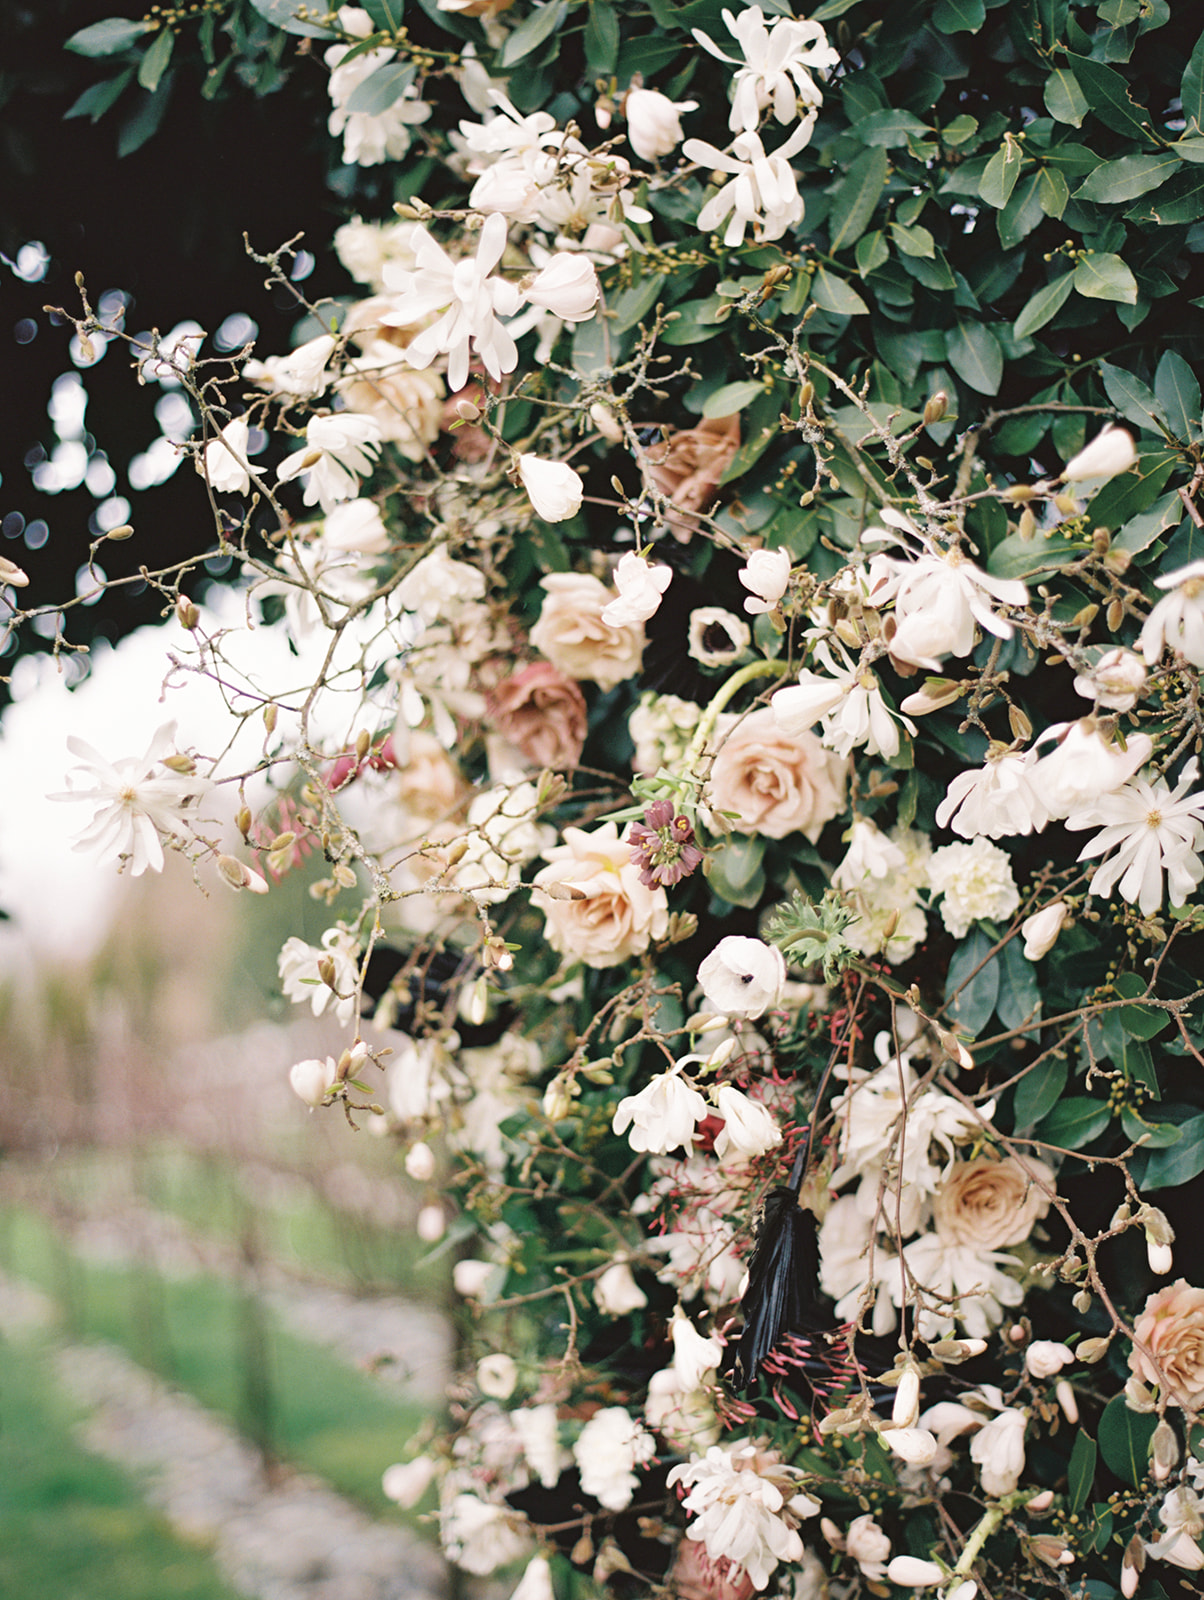 A floral hedge installation at Chateau Lill wedding ceremony outdoors